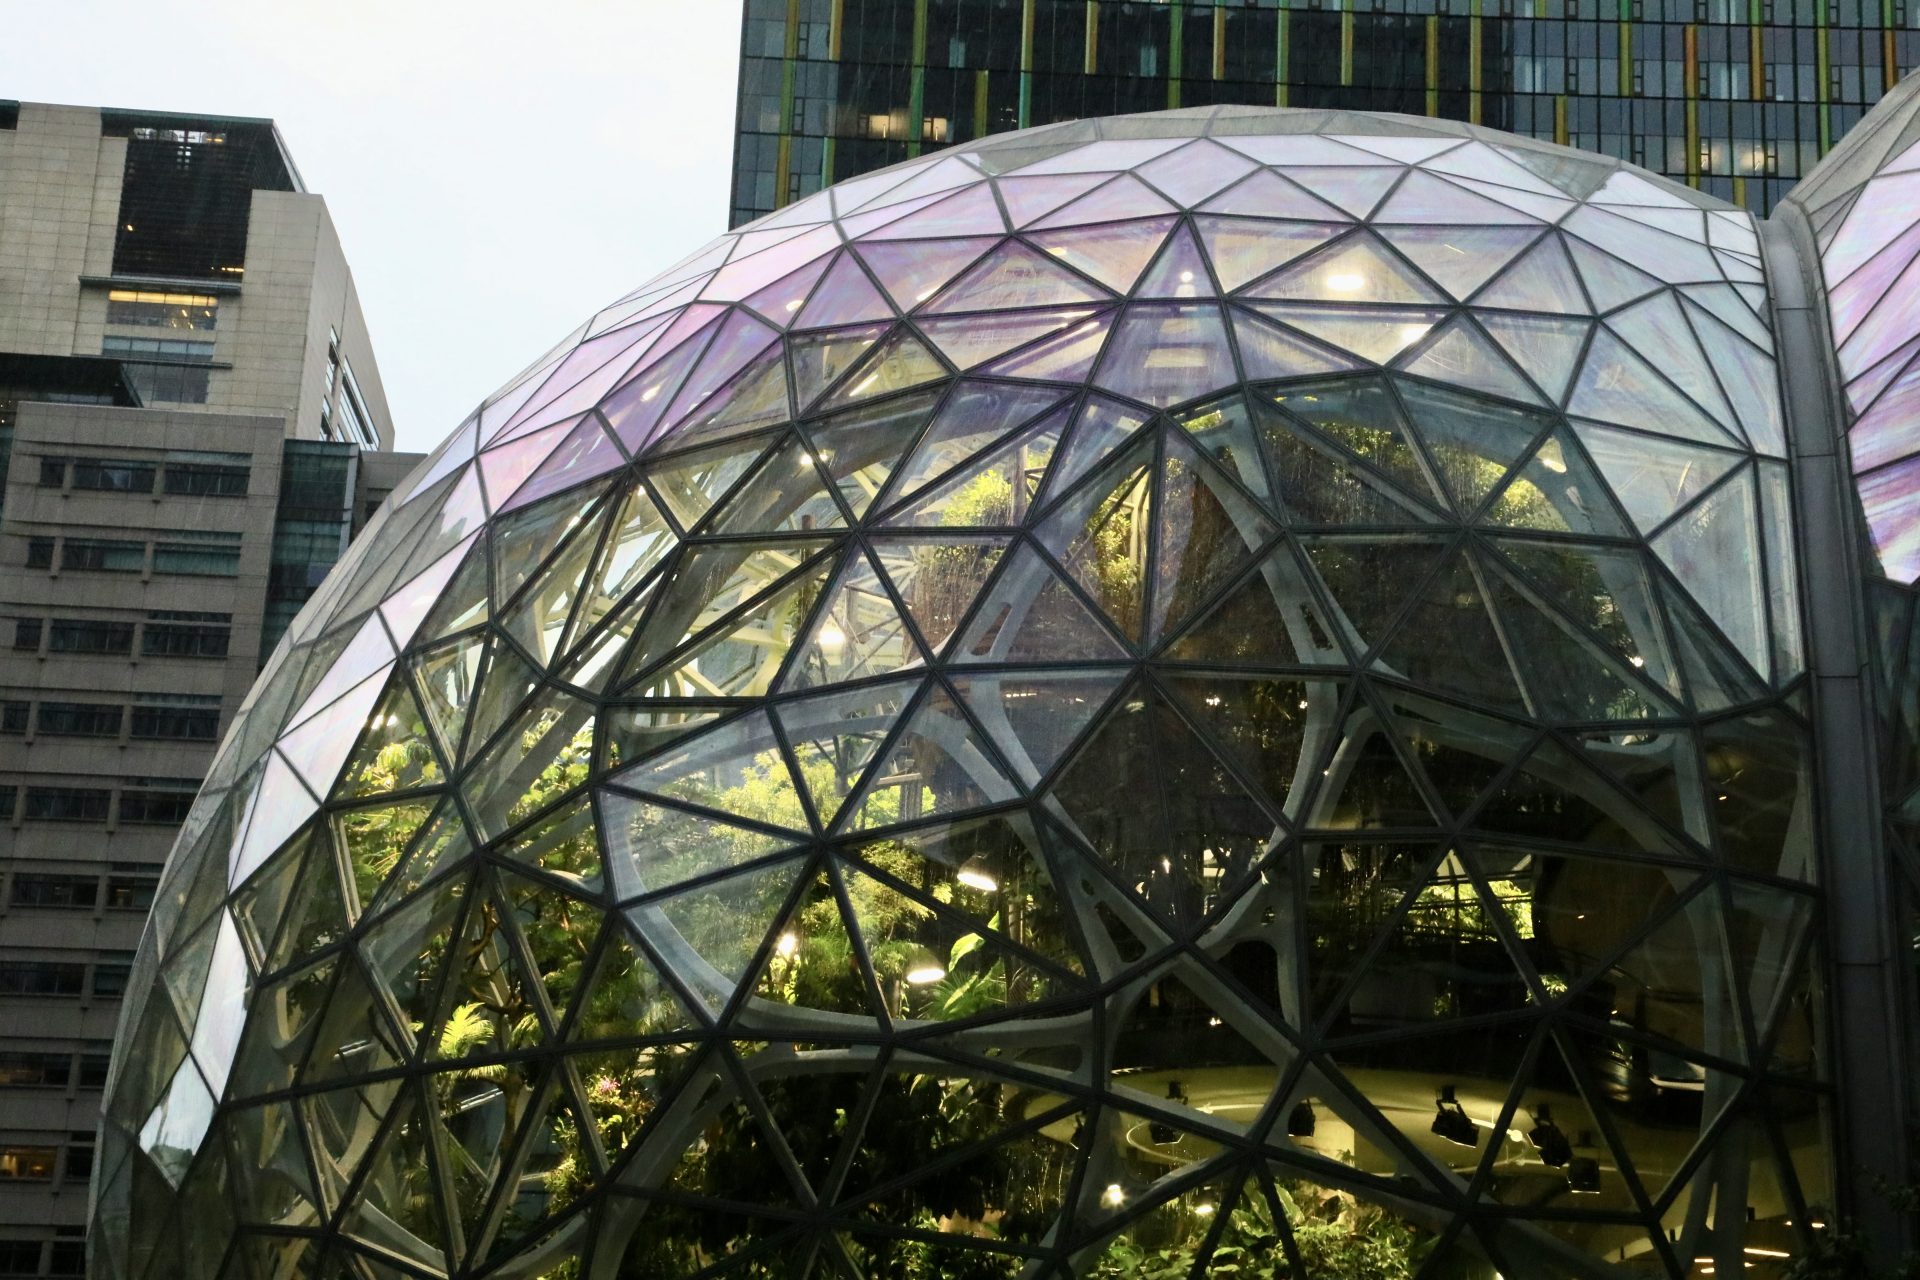 <p>Another great example: The Spheres from Seattle, Washington, in the US Northwest. The three transparent greenhouses are filled with different types of plants, concentrating a variety of greenery in a single space.</p>